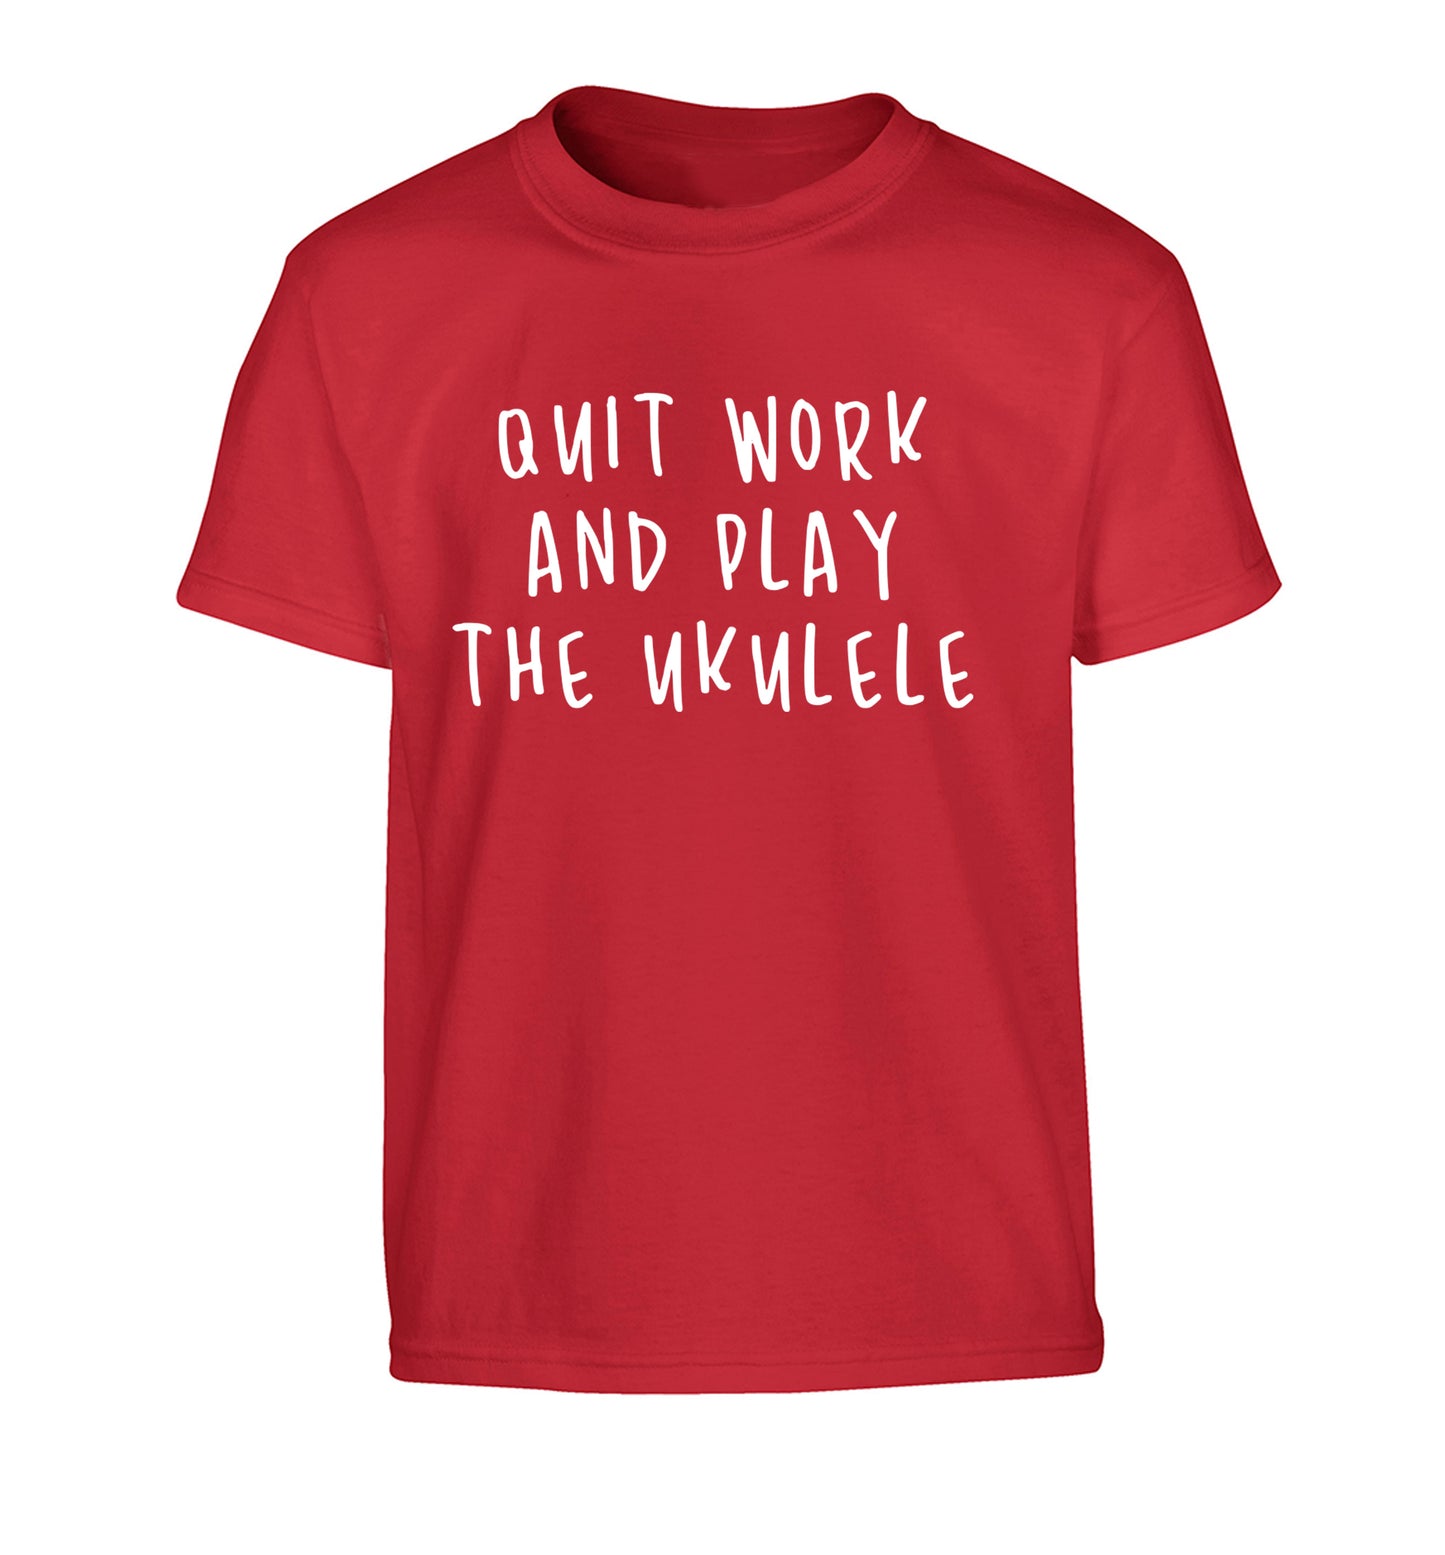 Quit work and play the ukulele Children's red Tshirt 12-14 Years